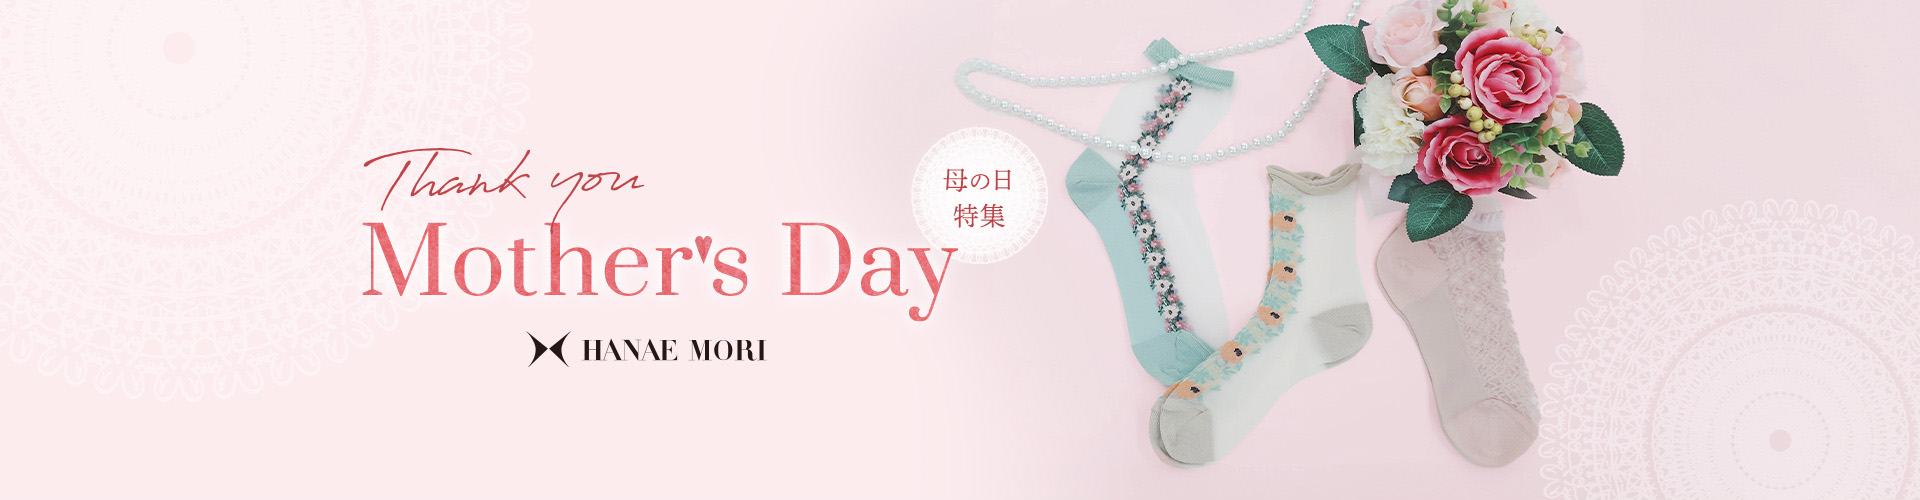 Thank you Mother's Day HANAE MORI 母の日特集